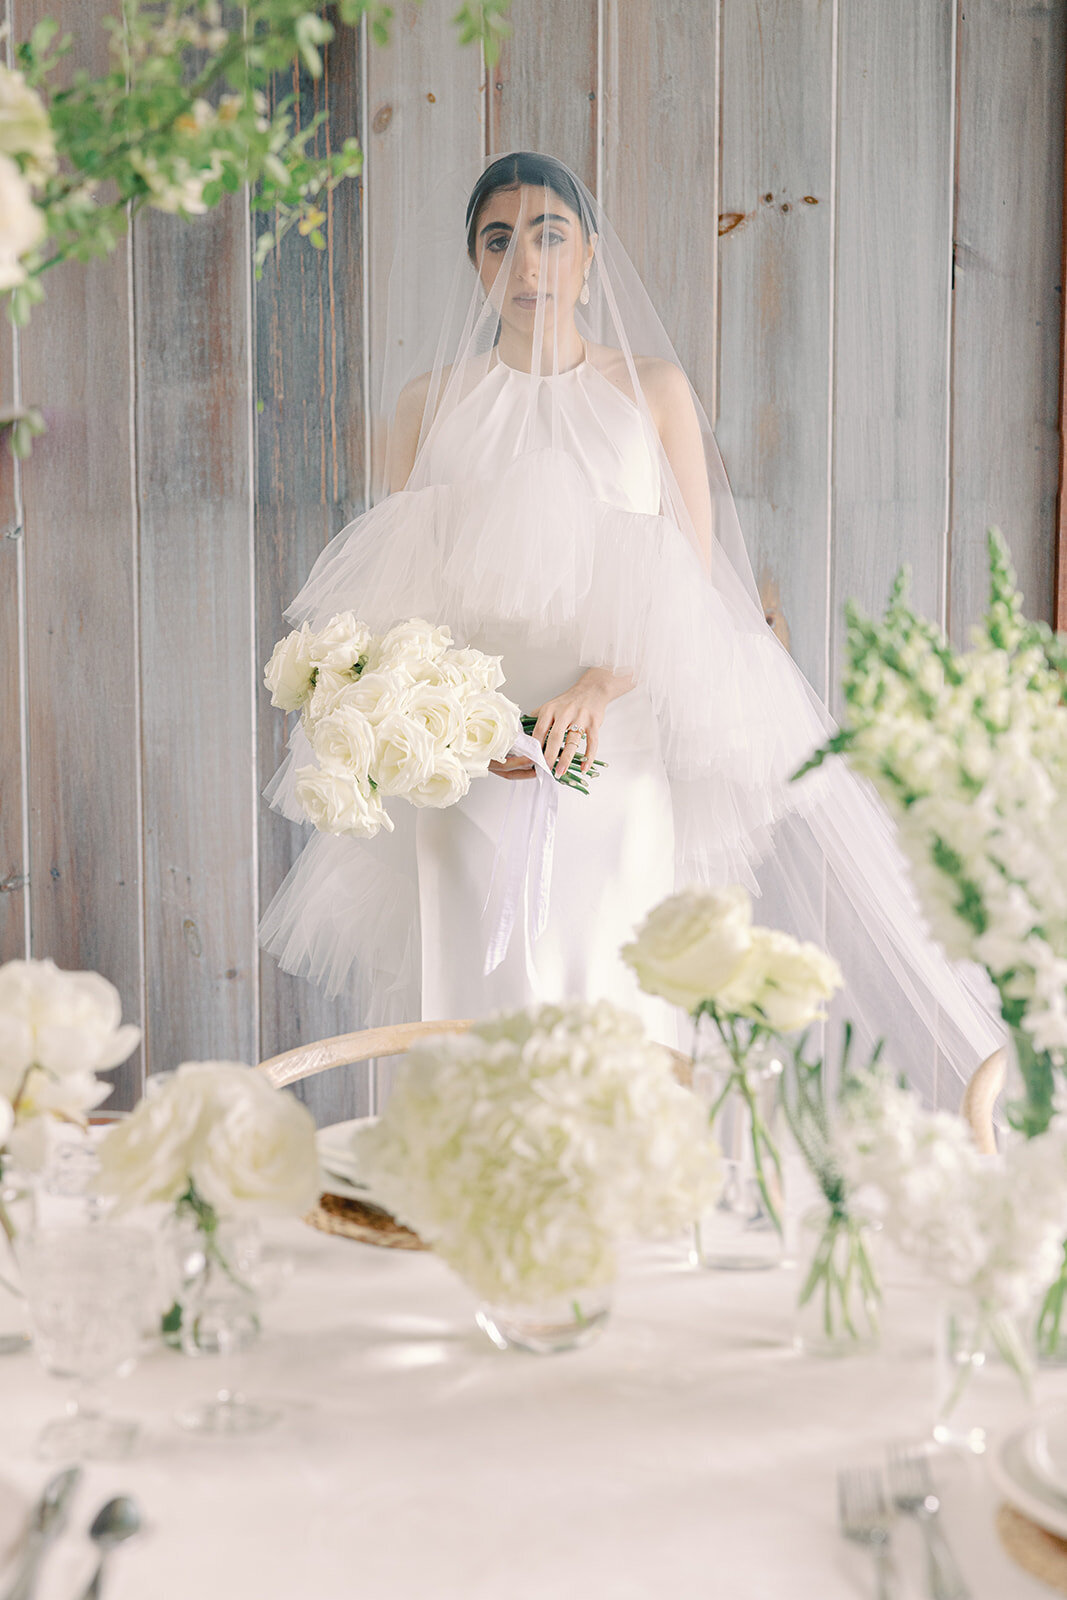 Bride with veil over her face holding a white bouquet in front of a table with white floral centerpieces